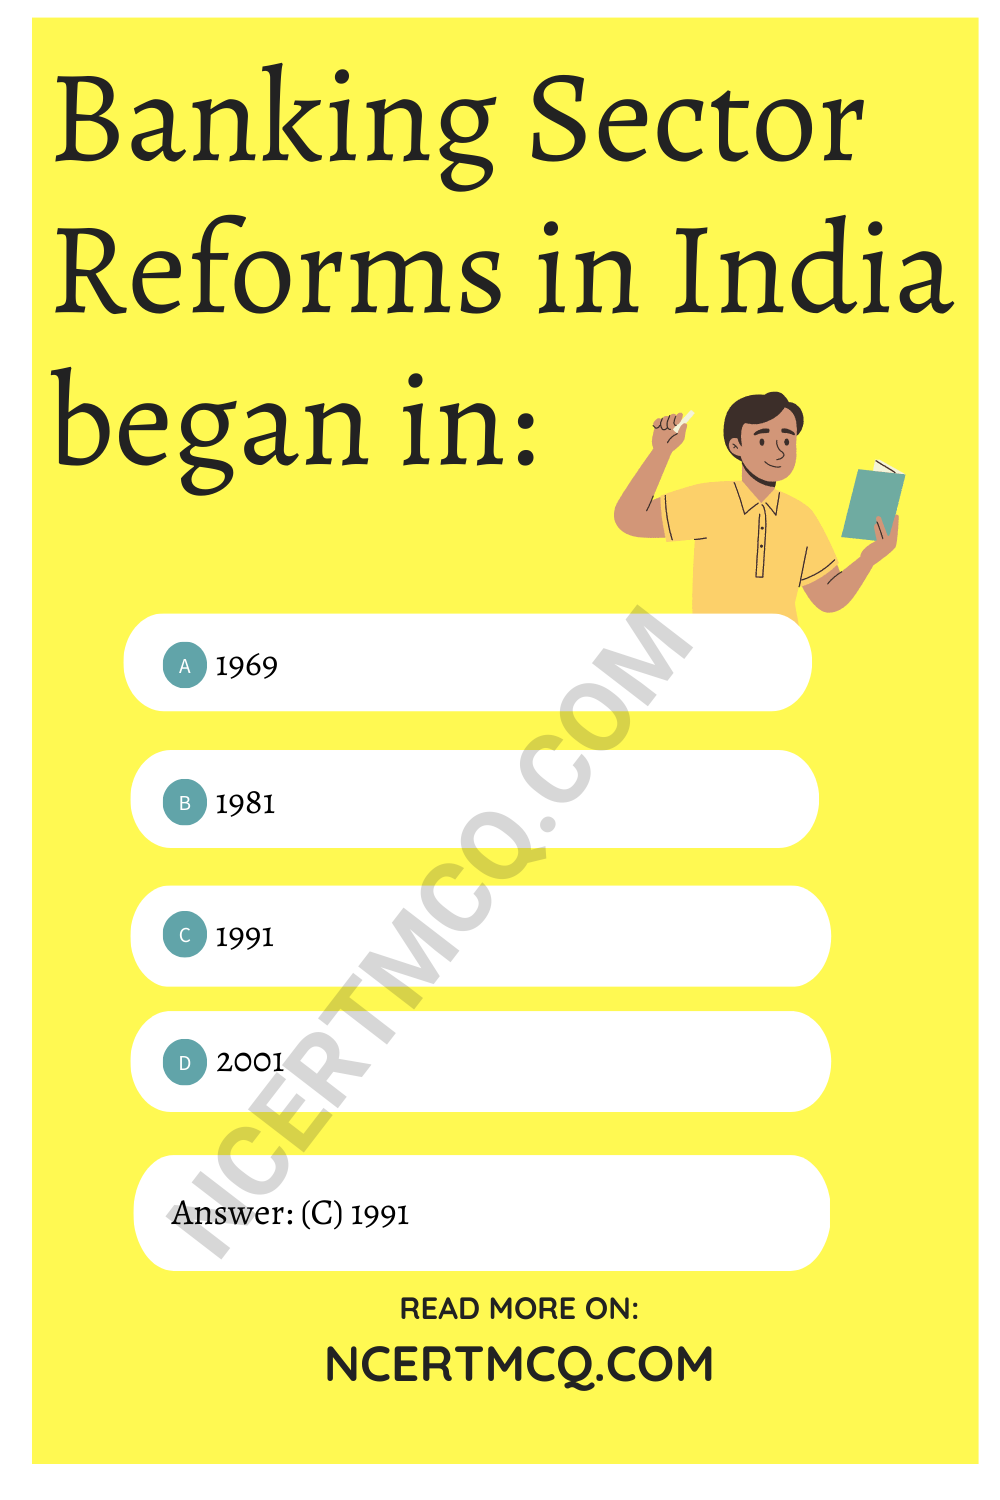 Banking Sector Reforms in India began in: